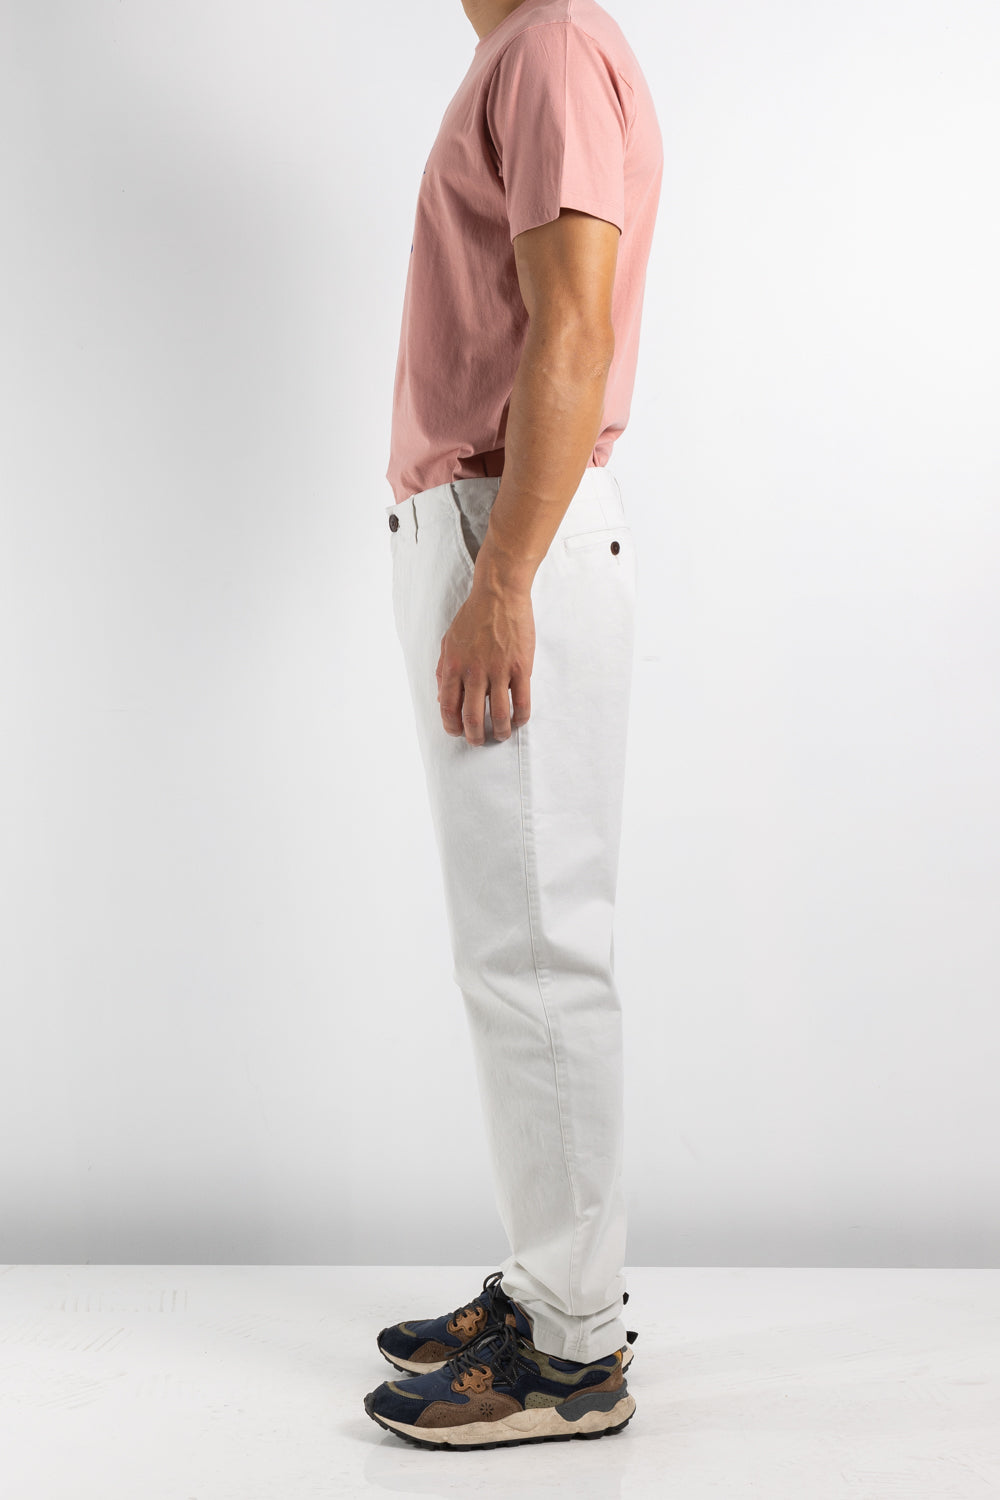 Mens Trouser | Cuisse de Grenouille Classic Chino | The Standard Store